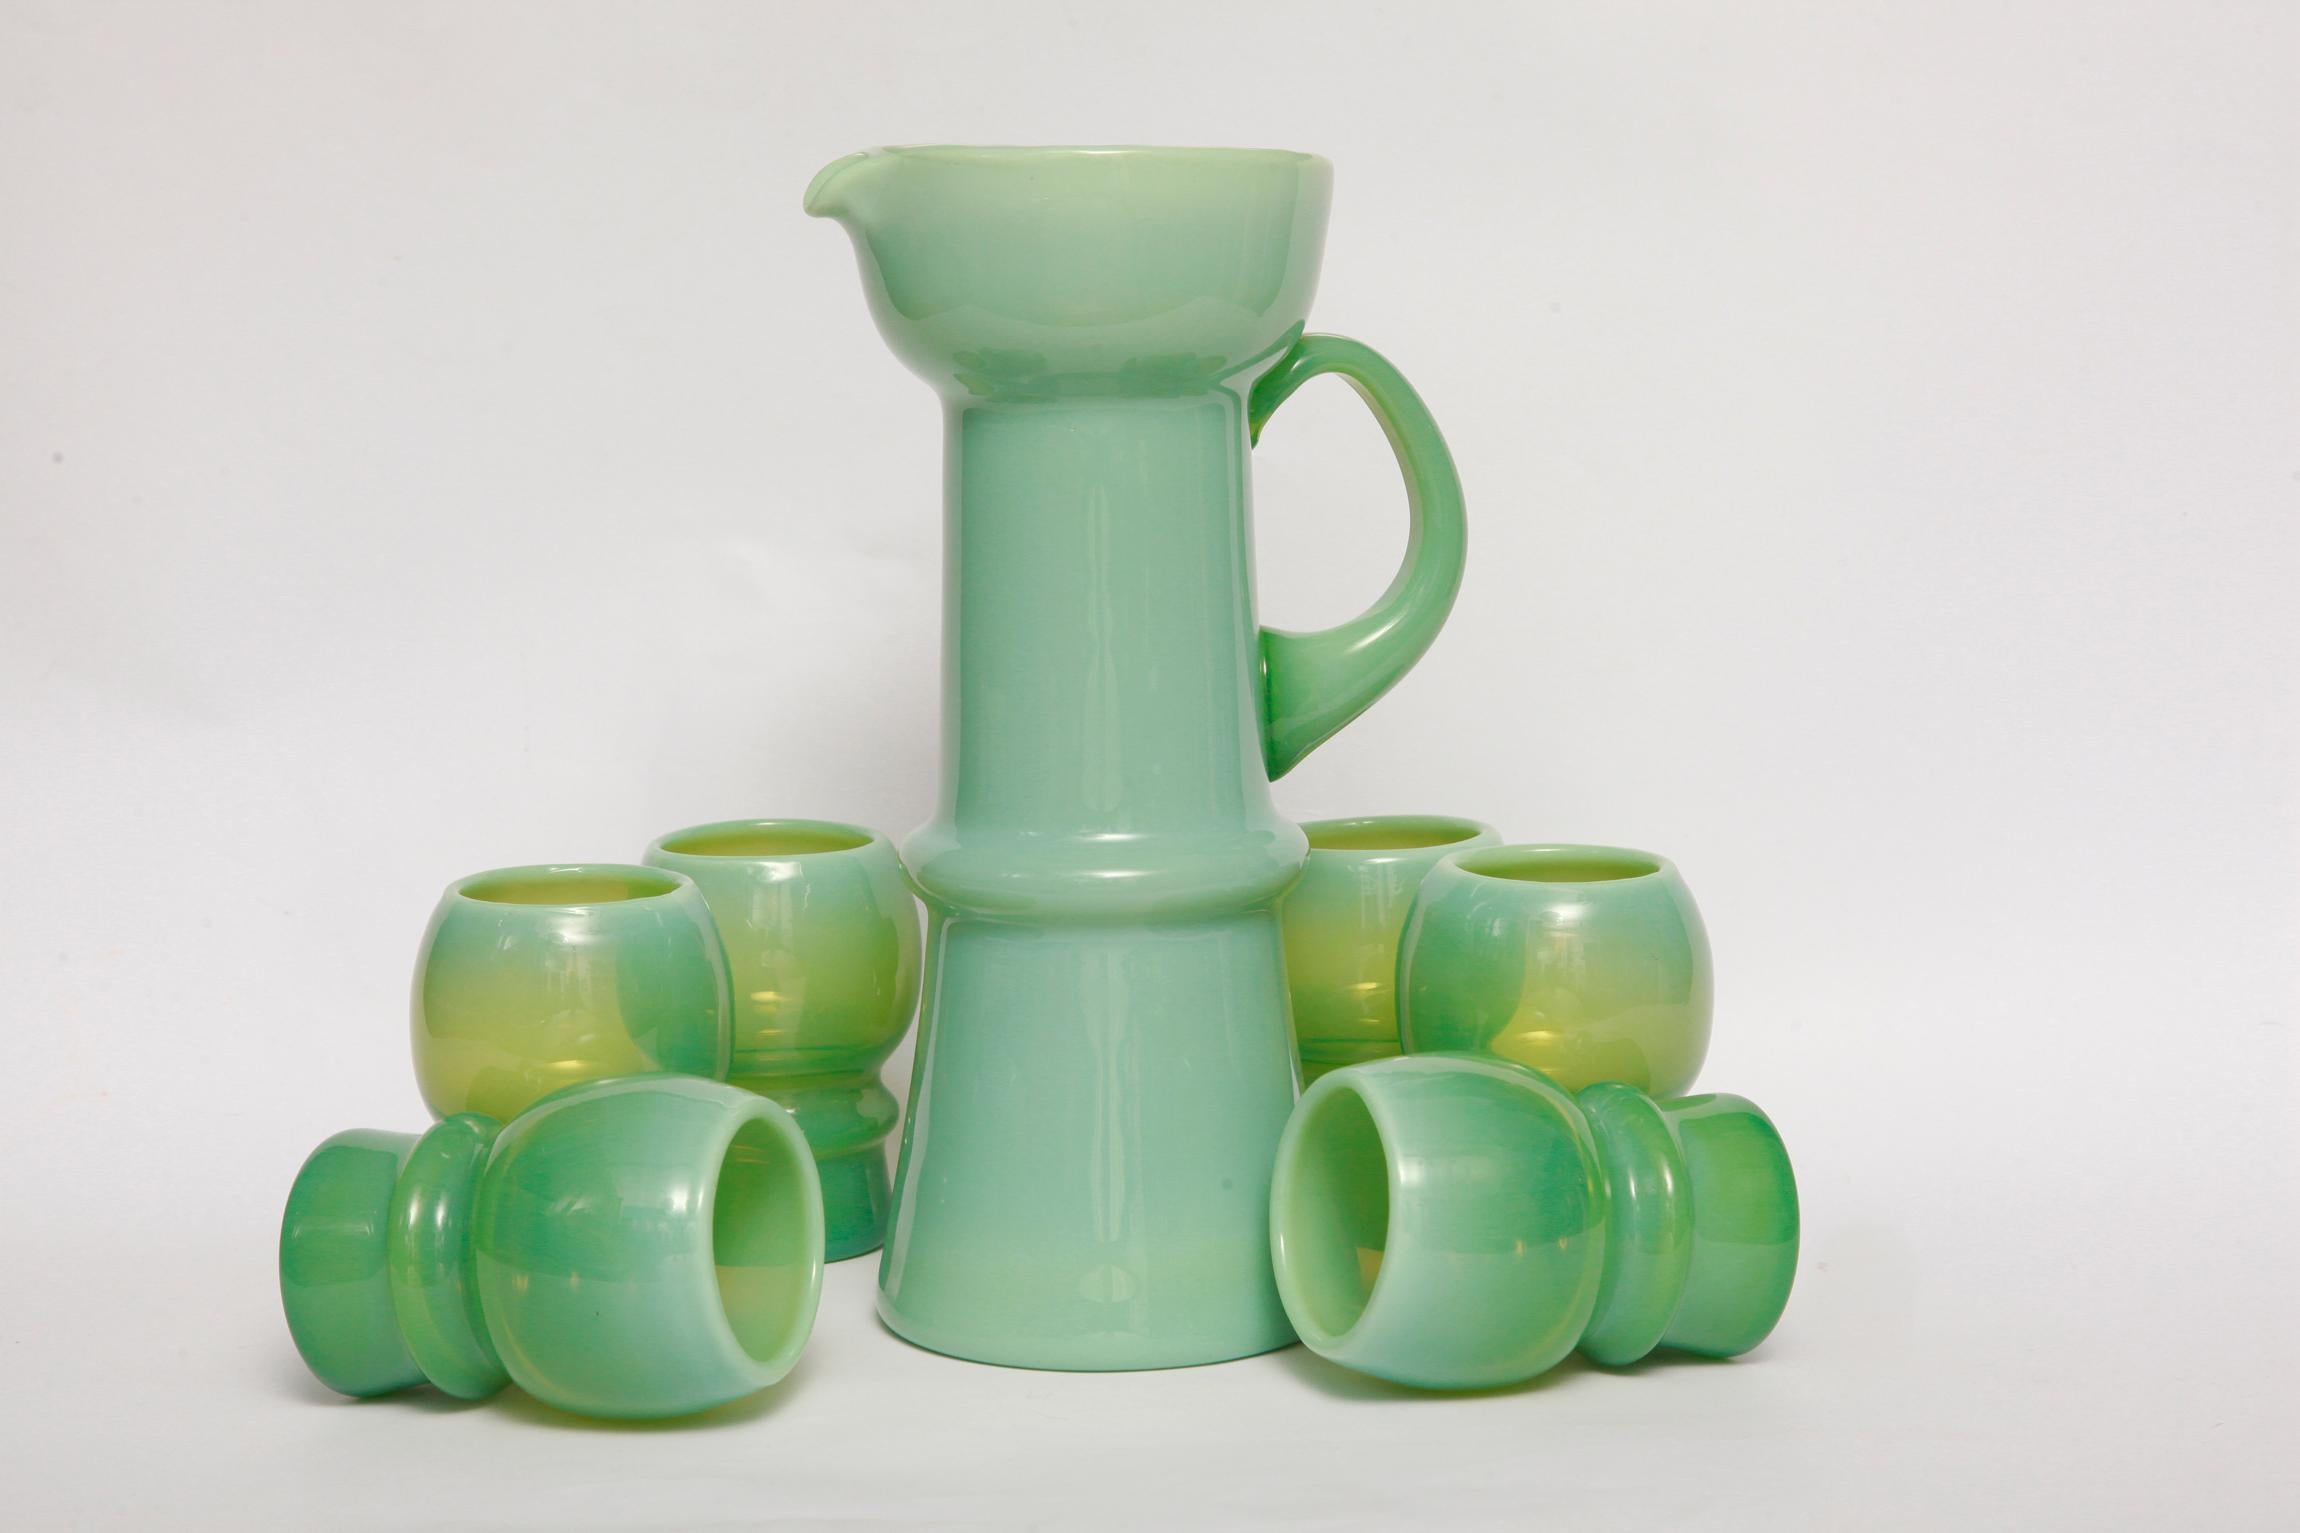 Mid-20th Century Glass Set Mint-Colored for Juices by Zbigniew Horbowy, Poland, 1960s